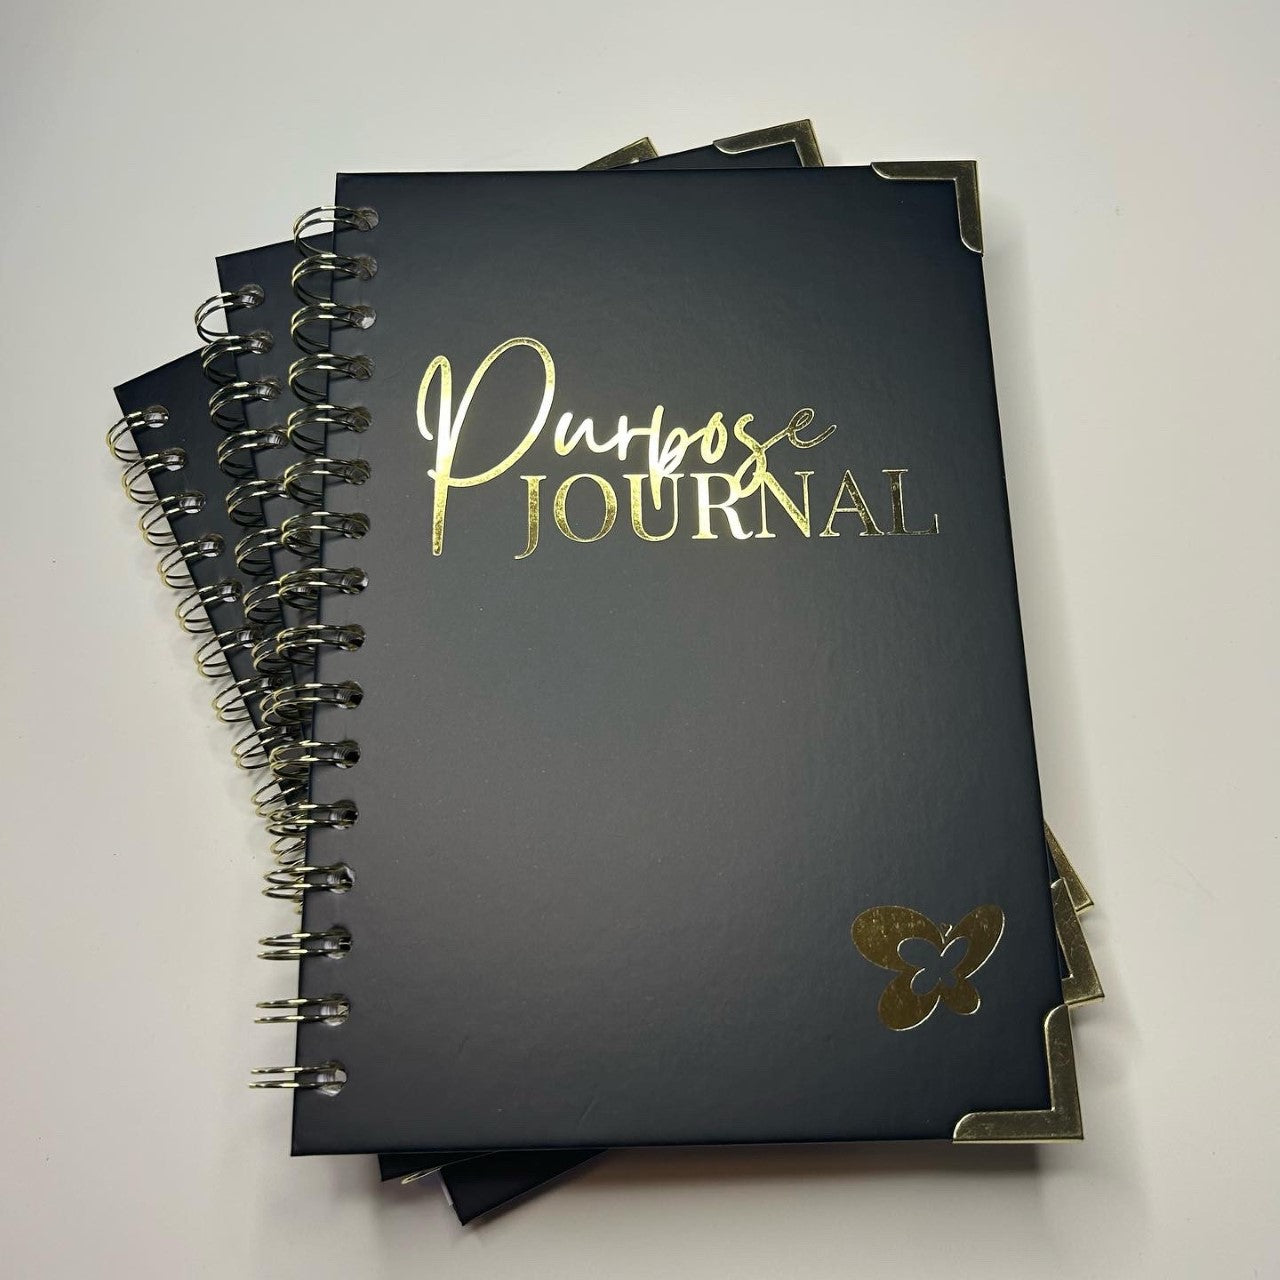 Midnight Black front hardcover with a smooth finish features the word "Purpose Journal" stamped in gold. 